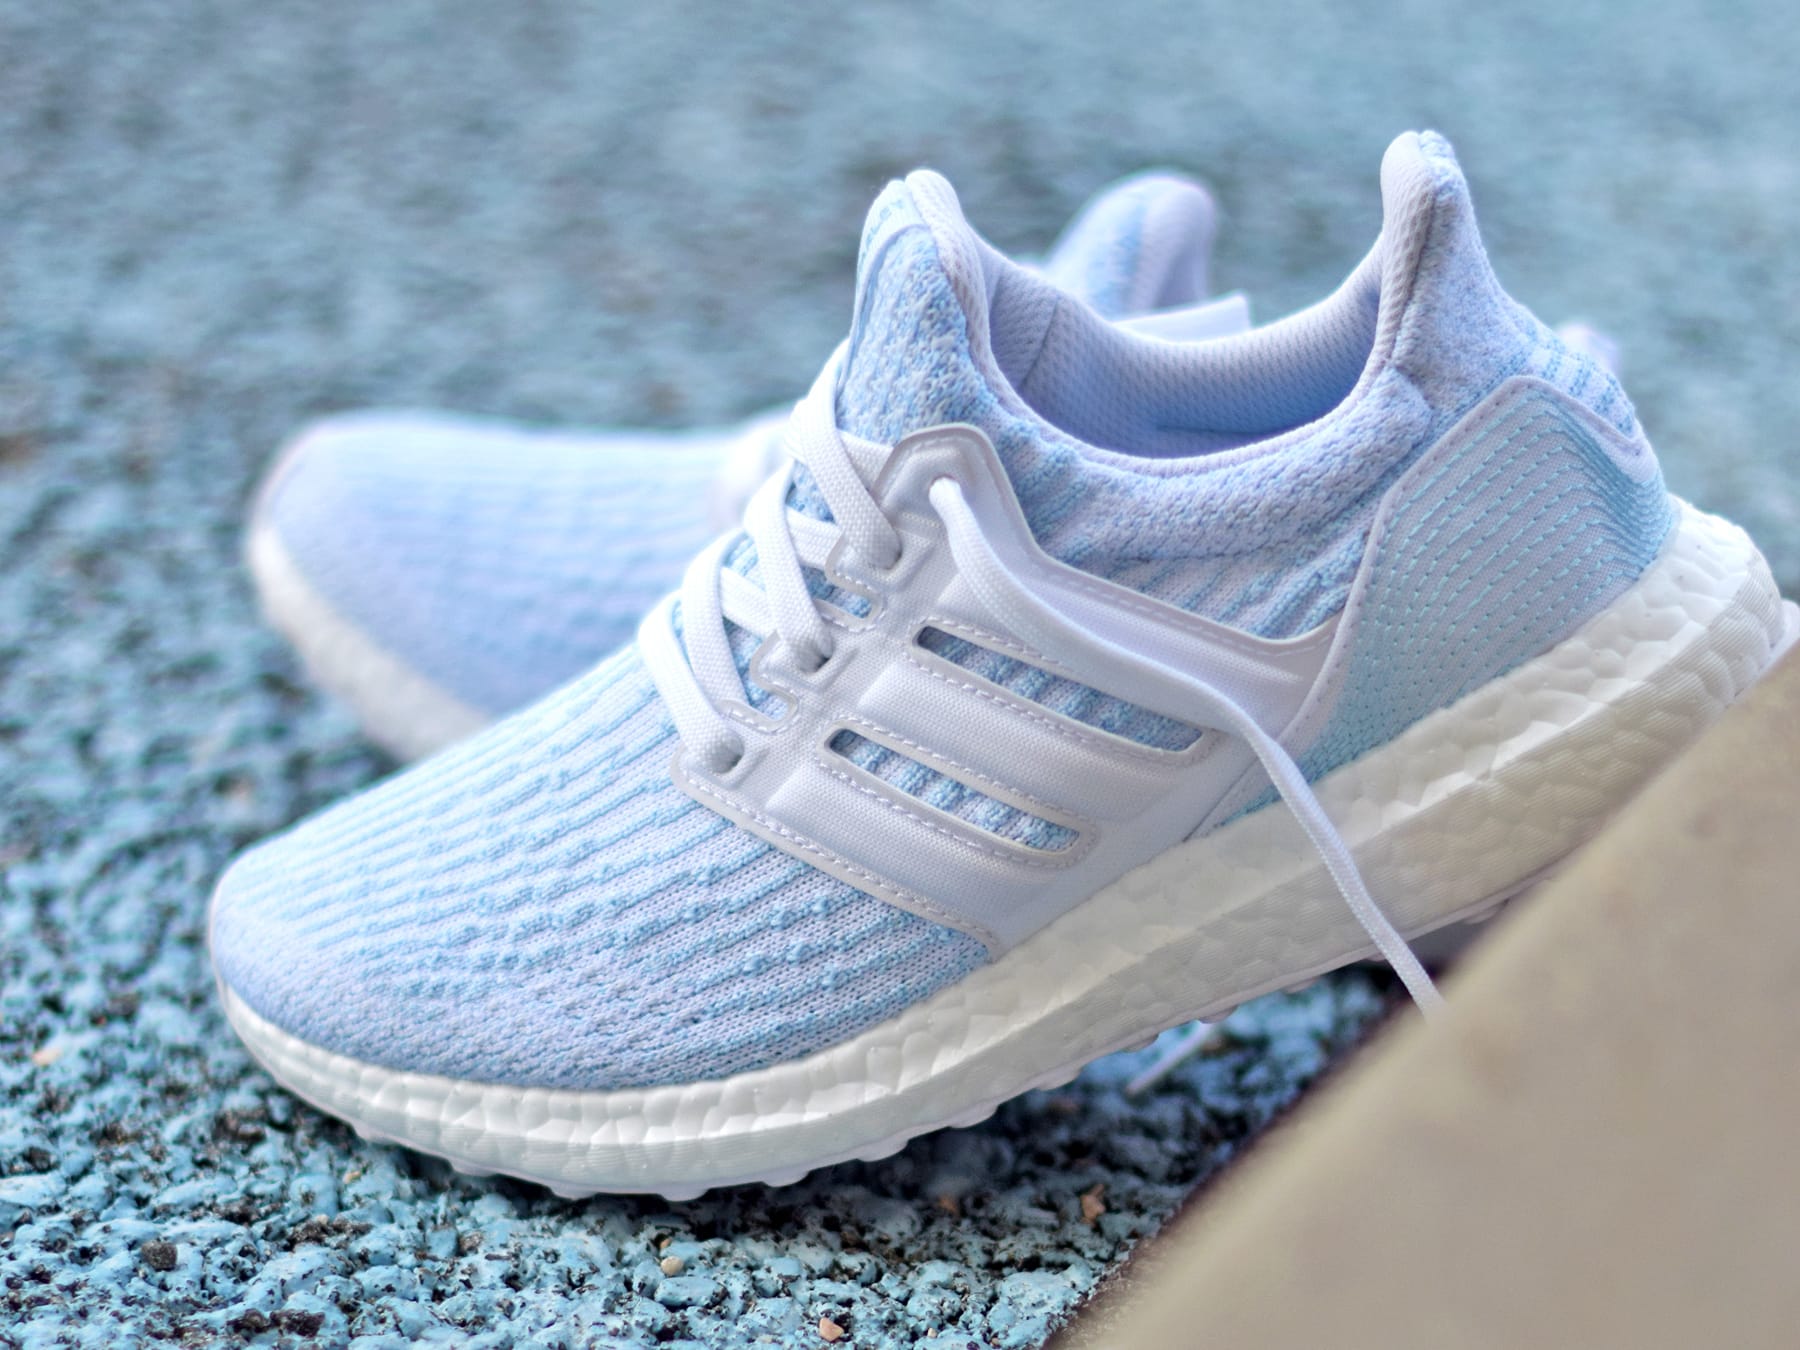 Parley x Adidas Ultra Boost 3.0 "Ice Blue" | Sole Collector